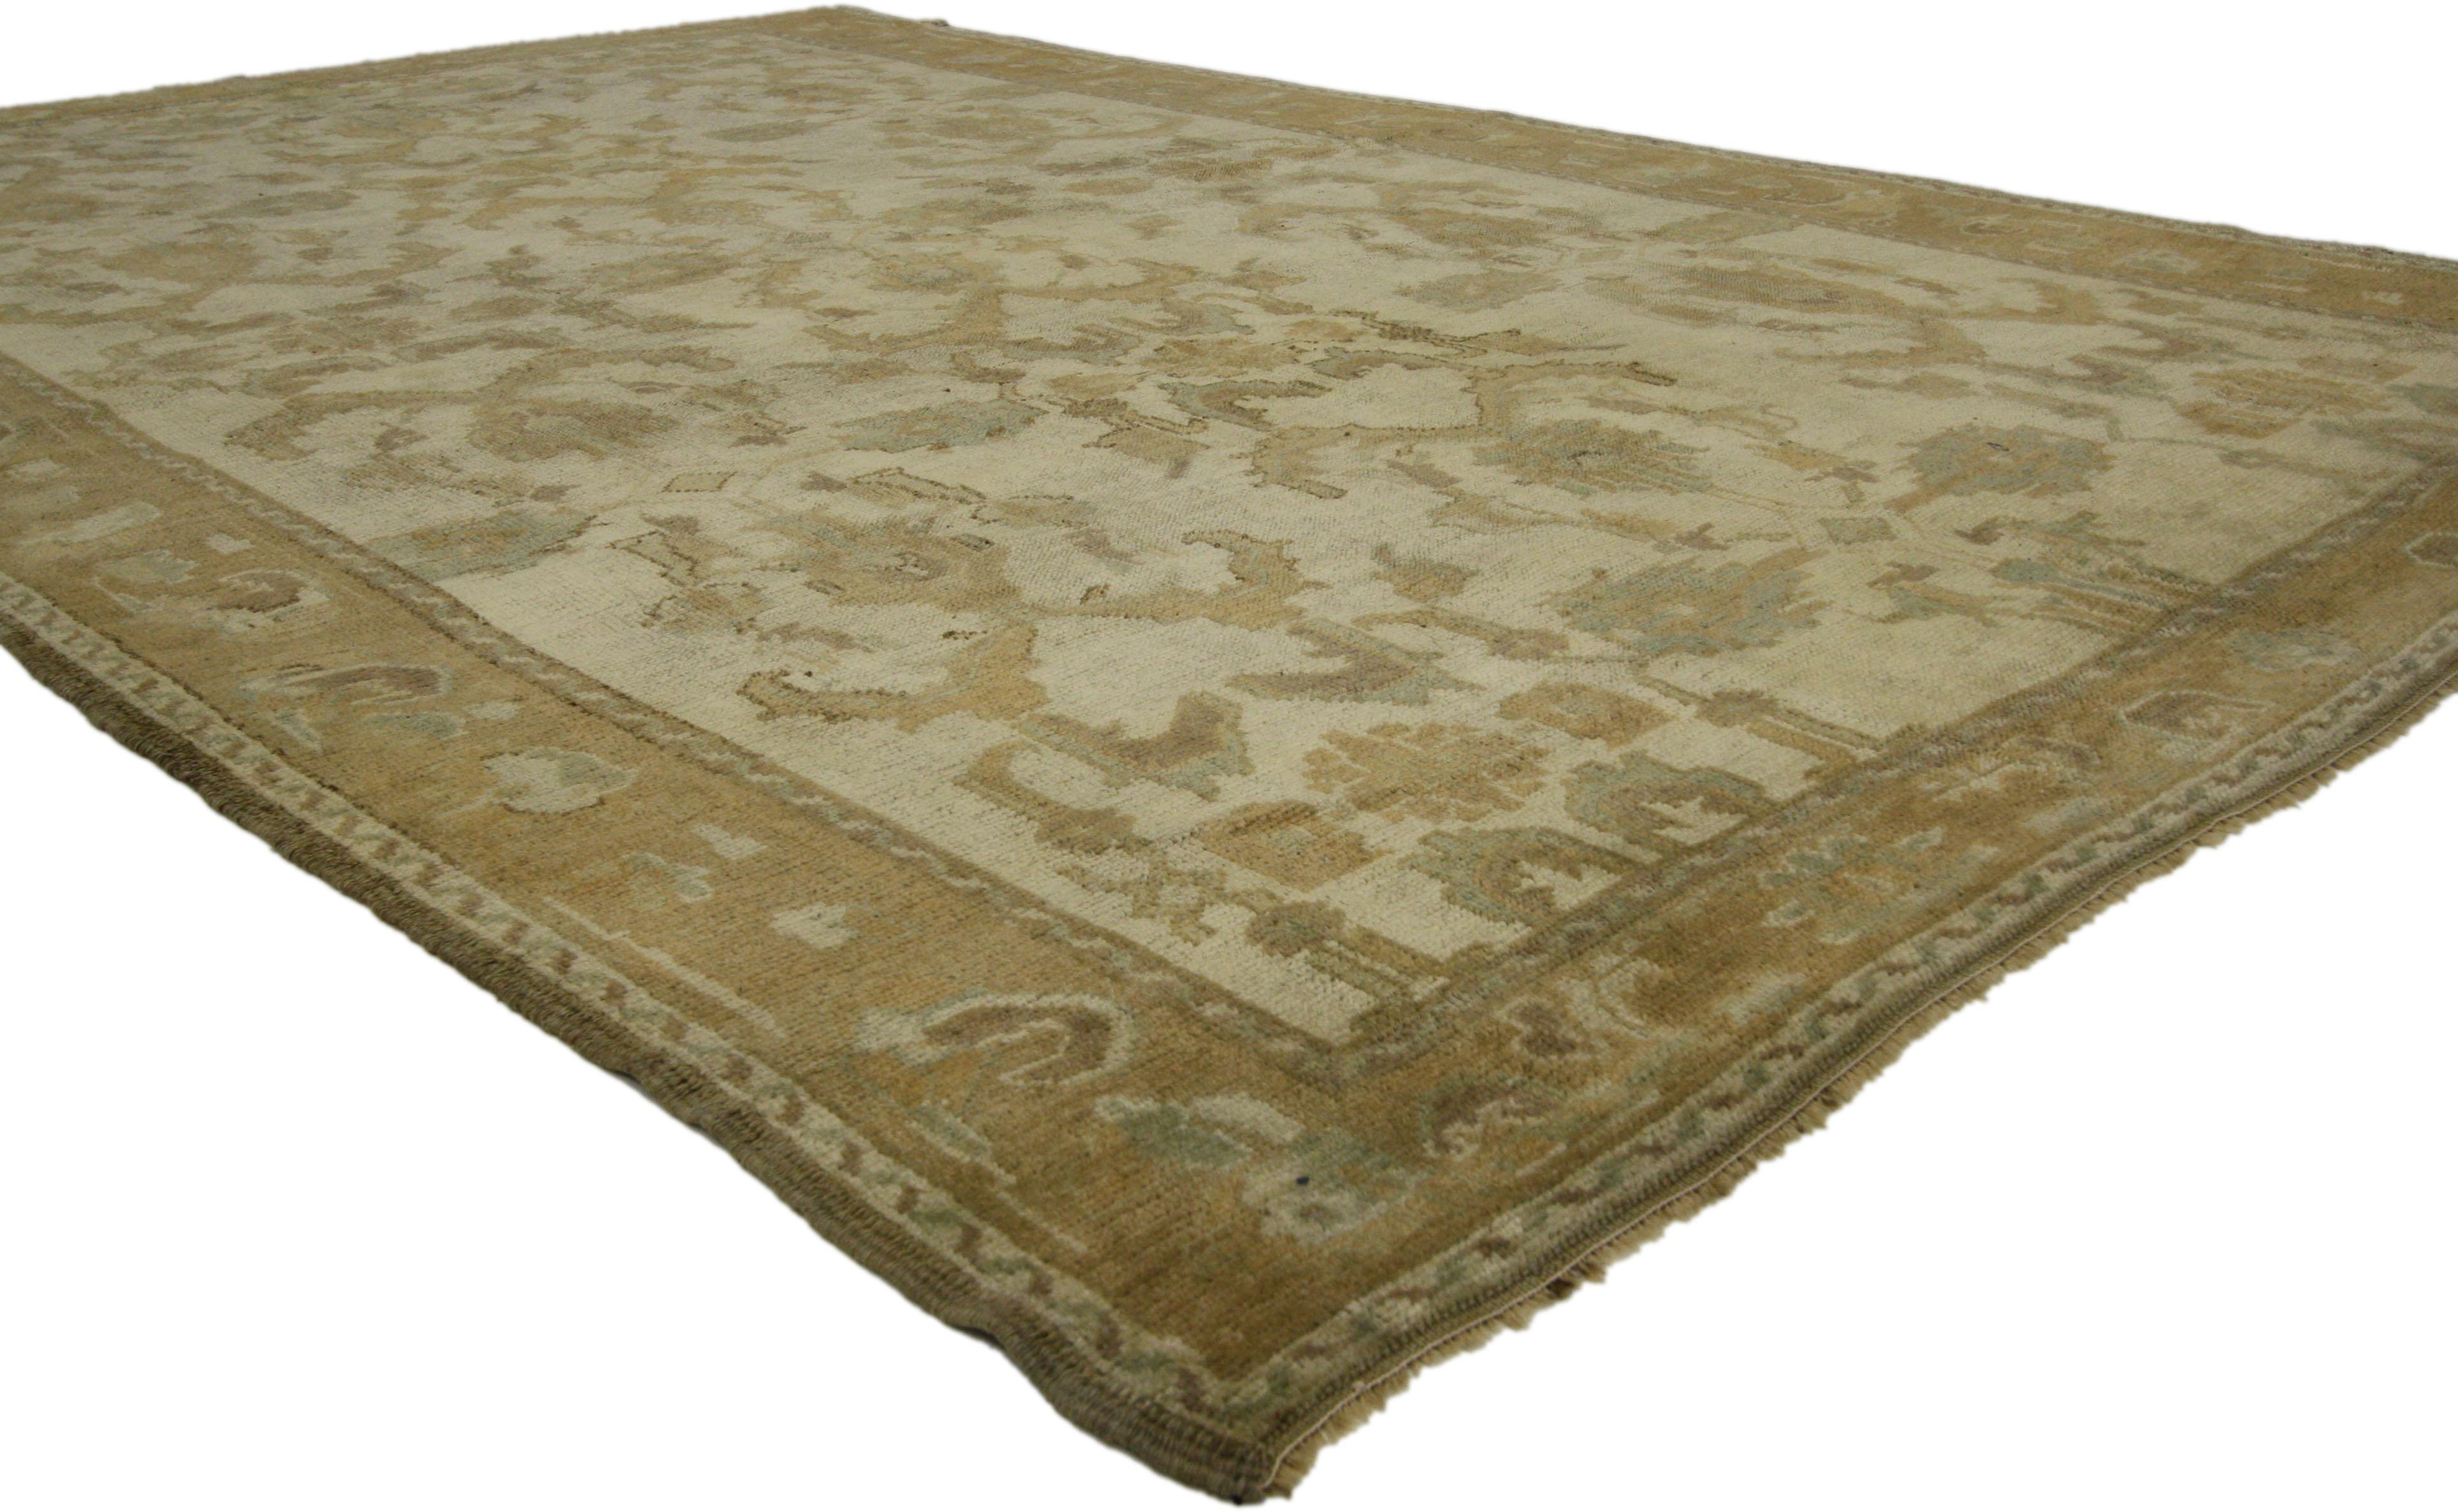 73744 Vintage Turkish Oushak Rug with Monochromatic Mission Style and Neutral Colors. This hand-knotted wool vintage Turkish Oushak rug features an all-over pattern composed of serrated curved sickle leaves, leafy tendrils, stylized florals,